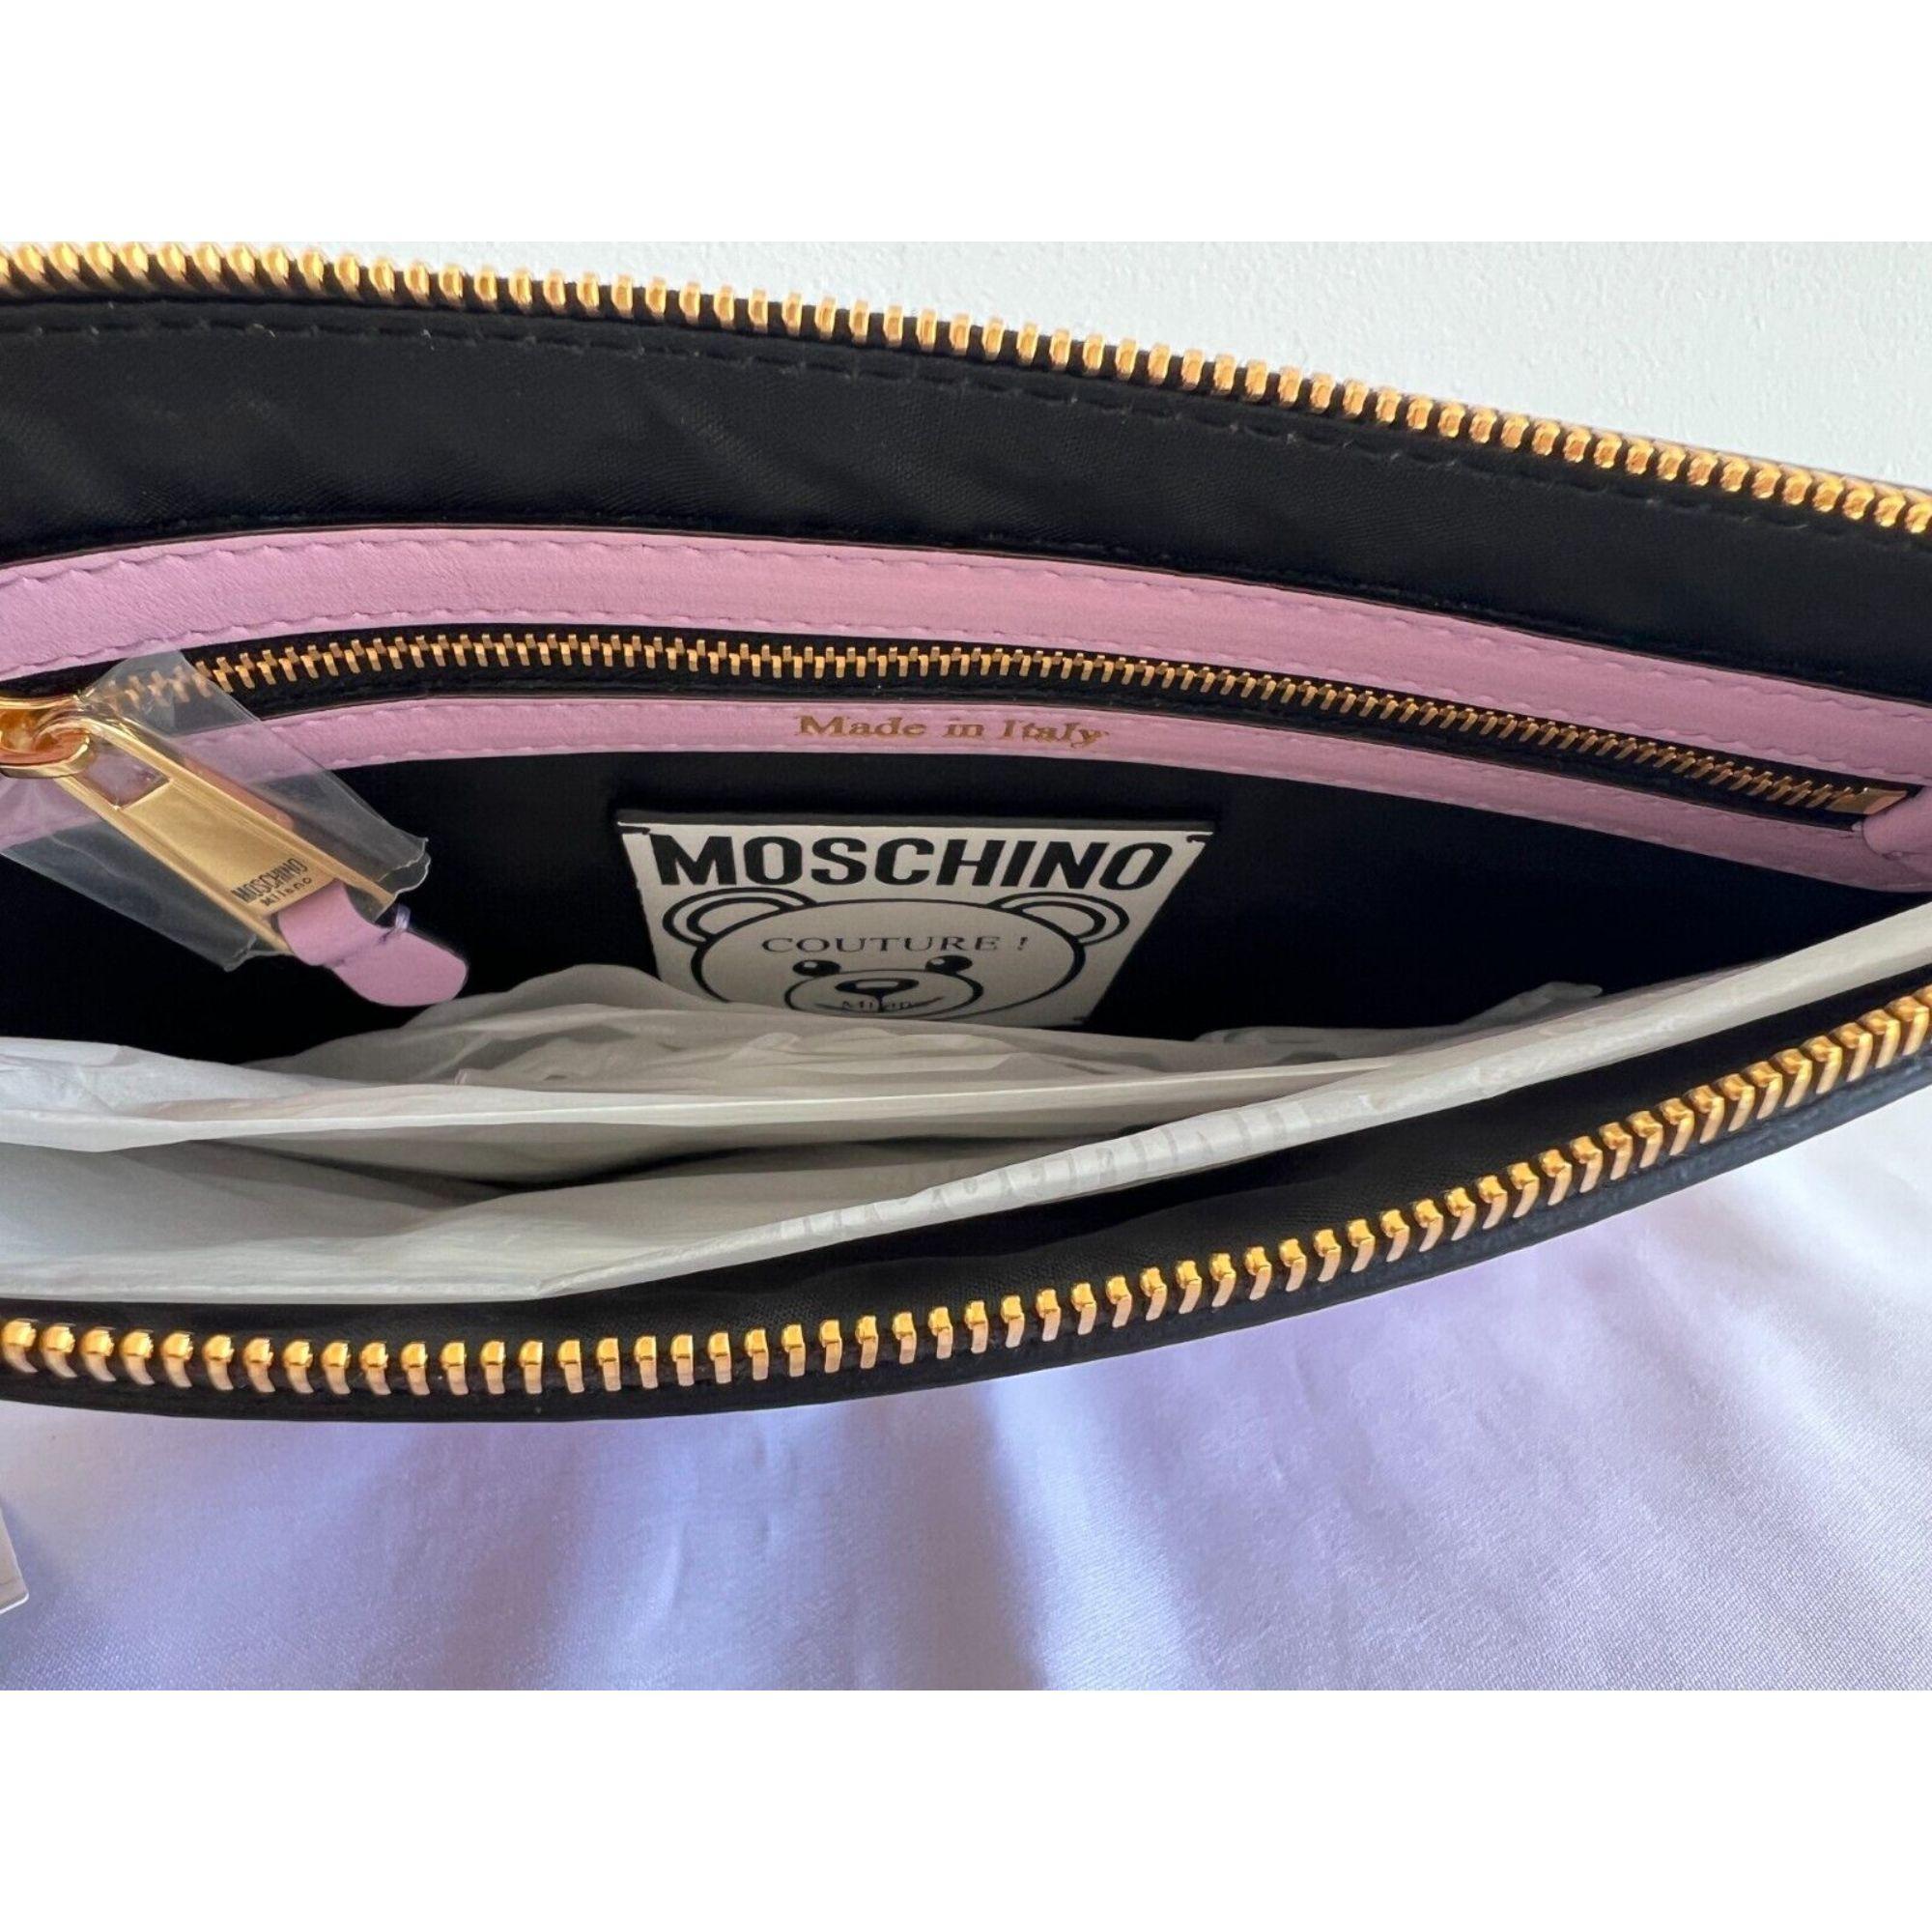 SS21 Moschino Couture Pink Clutch with Embroidered Teddy Bear by Jeremy Scott For Sale 1